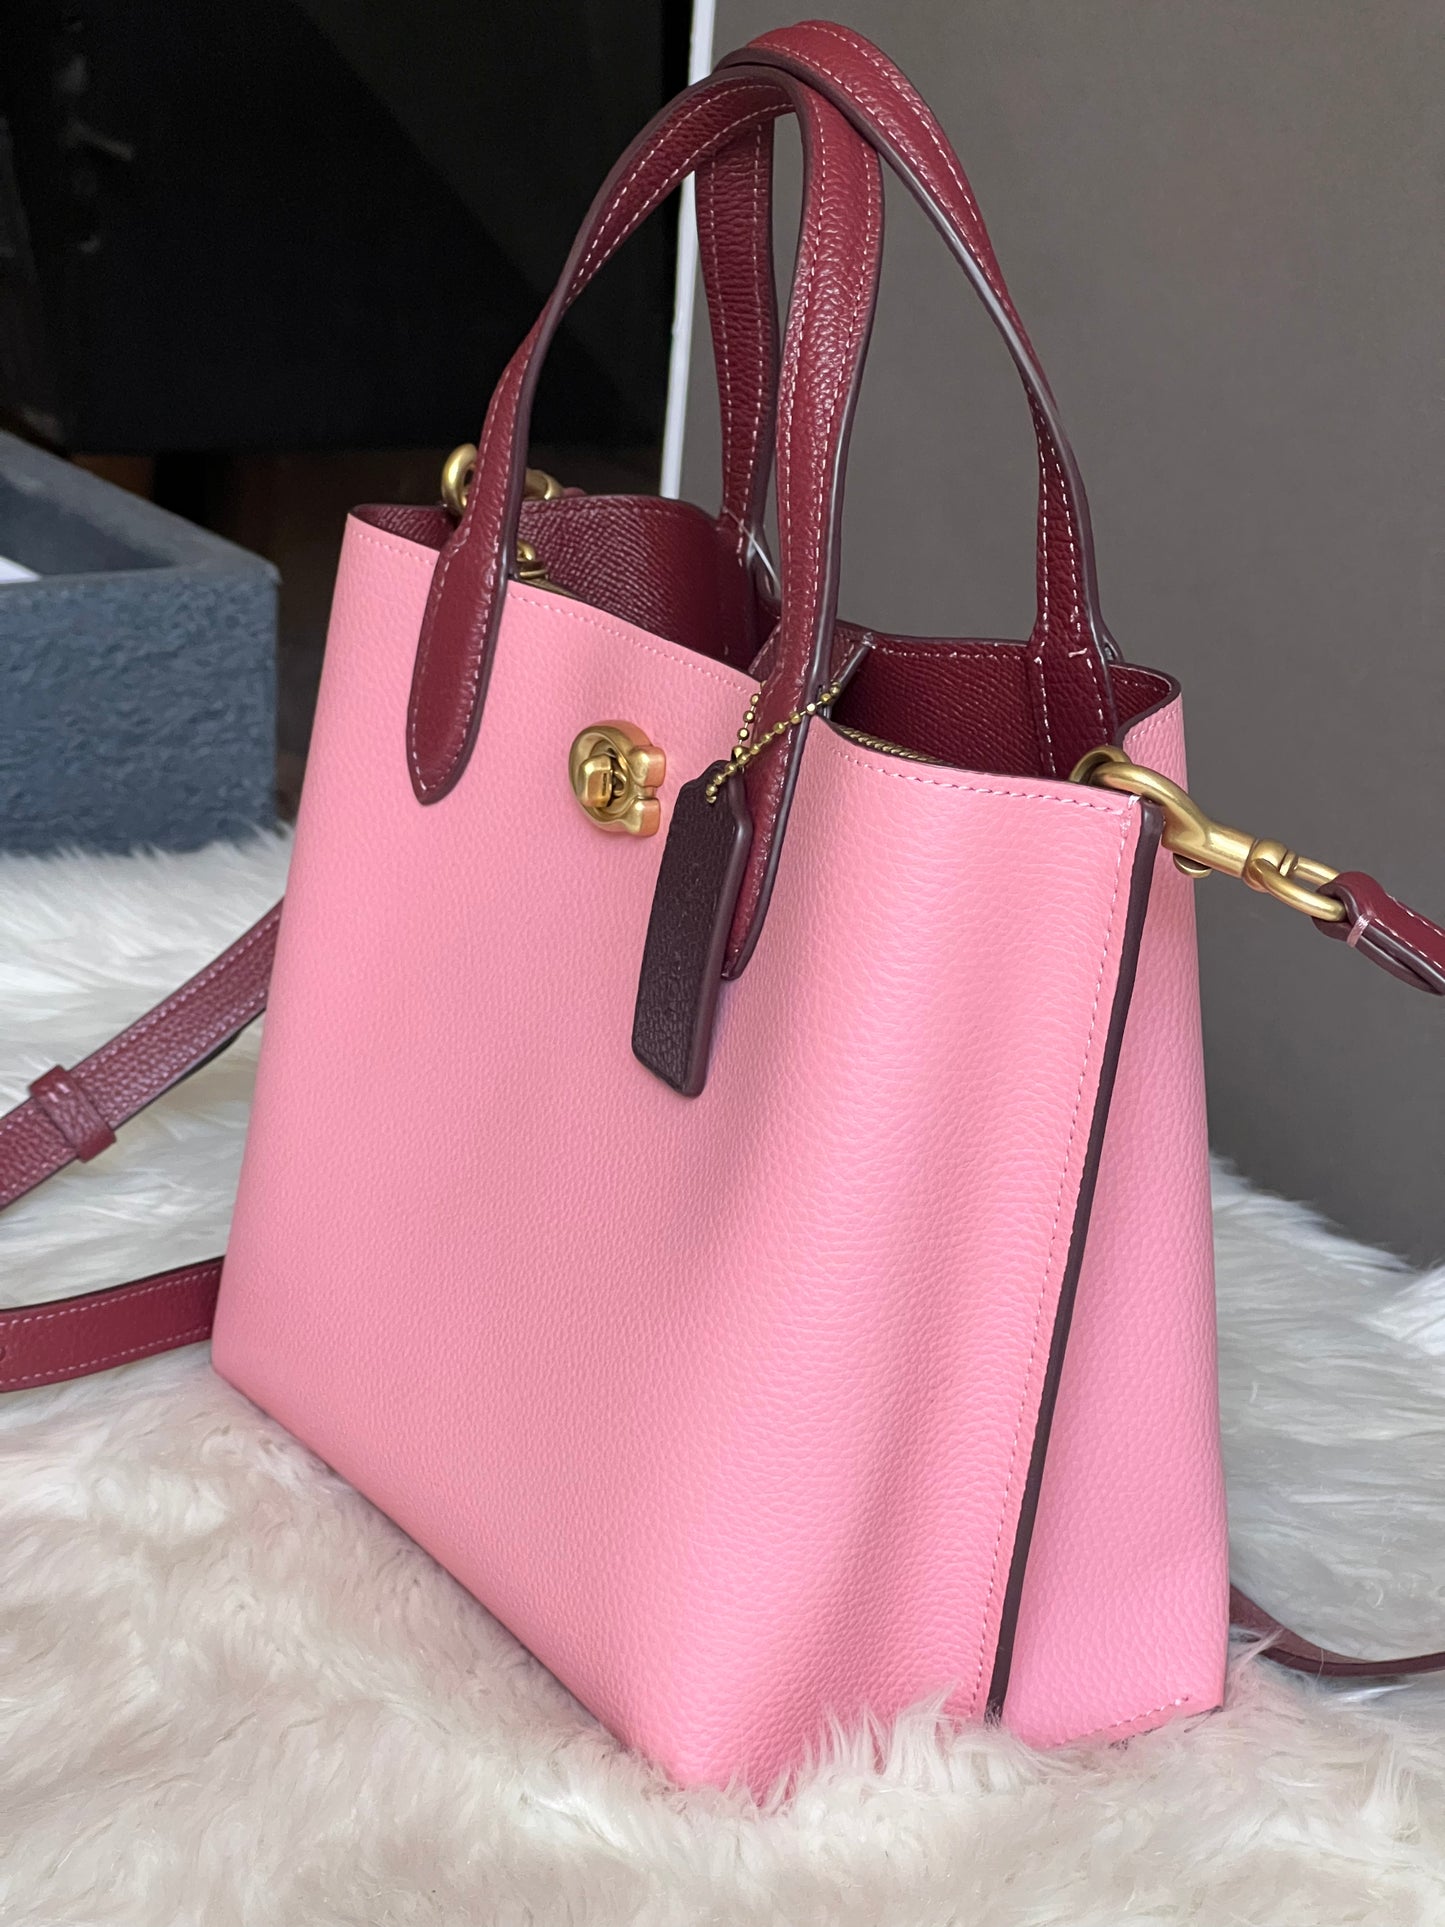 Coach Willow Tote 24 in Colorblock